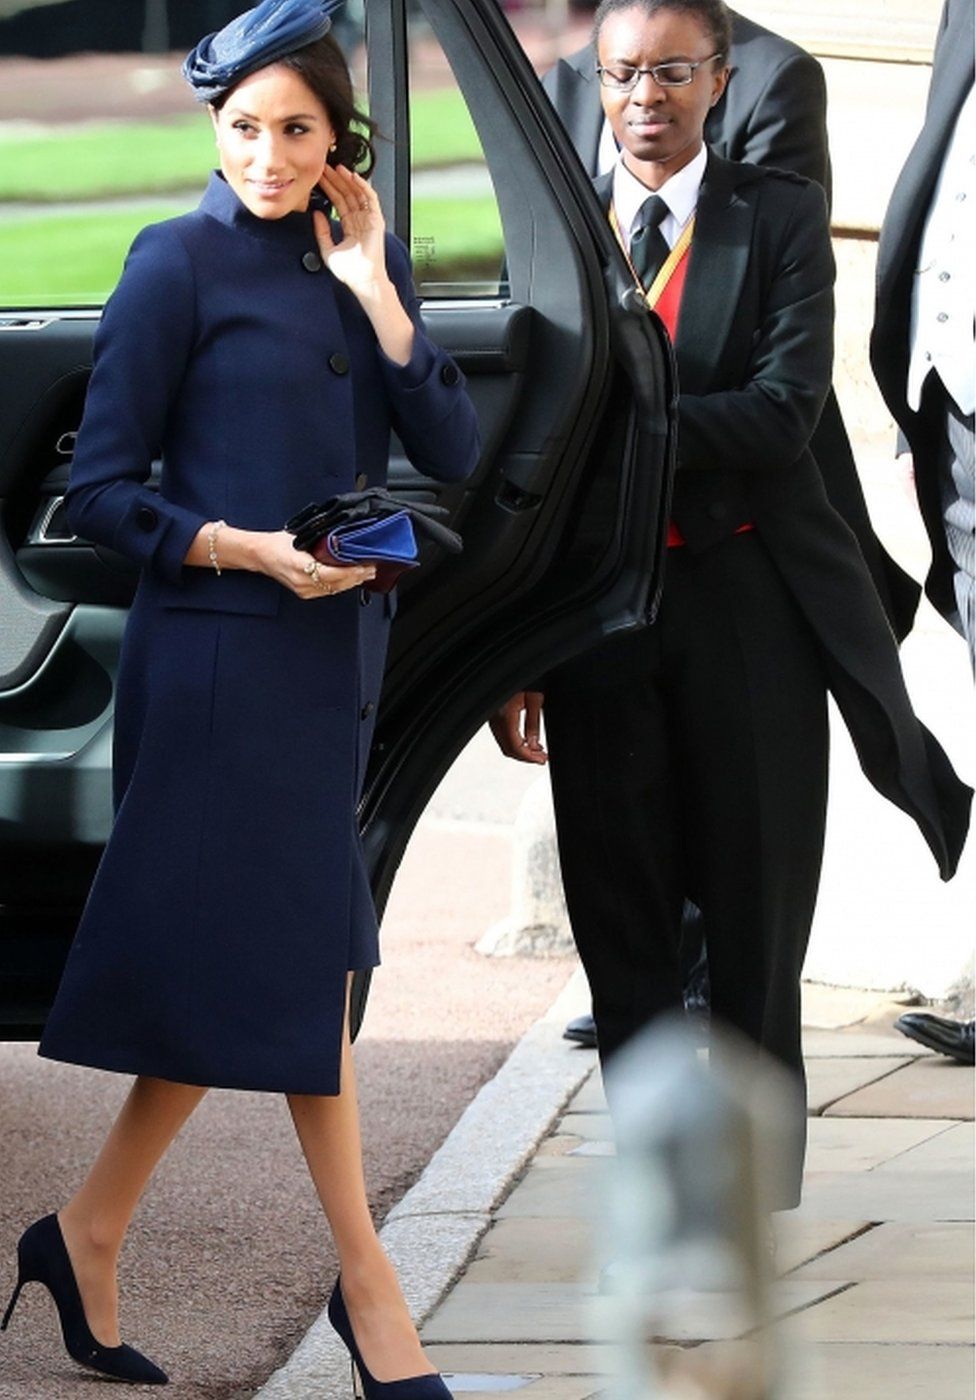 The duchess arriving at the wedding of Princess Eugenie